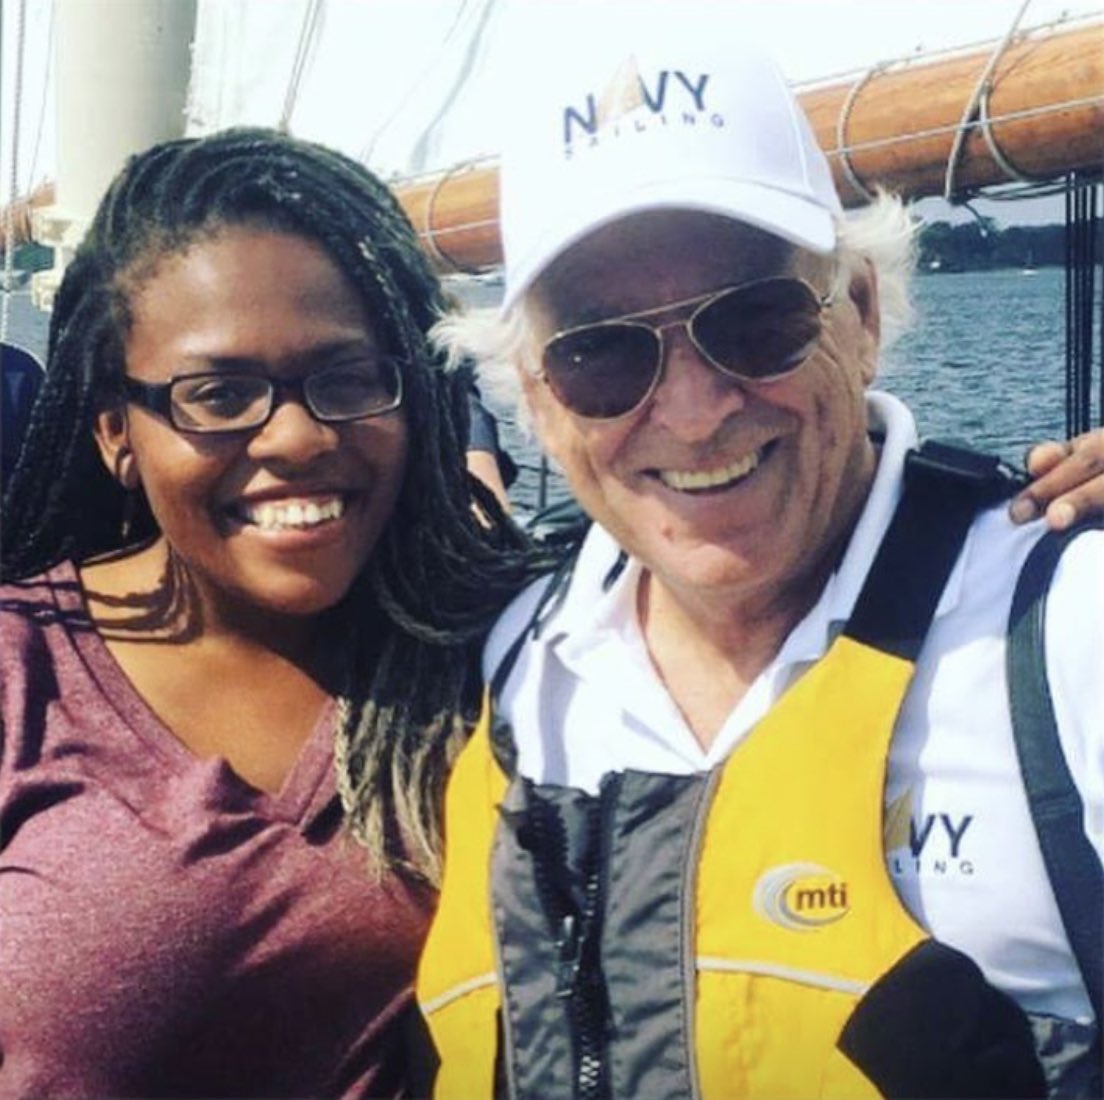 My friend 💖 His lil sailboat was passing ours and I said “hi I’m Tasha” and he said “hi I’m Jimmy.” He came aboard, spent the whole day on our schooner learning the ropes and telling us jokes. Then, treated us to dinner. Rest easy, Jimmy Buffett.